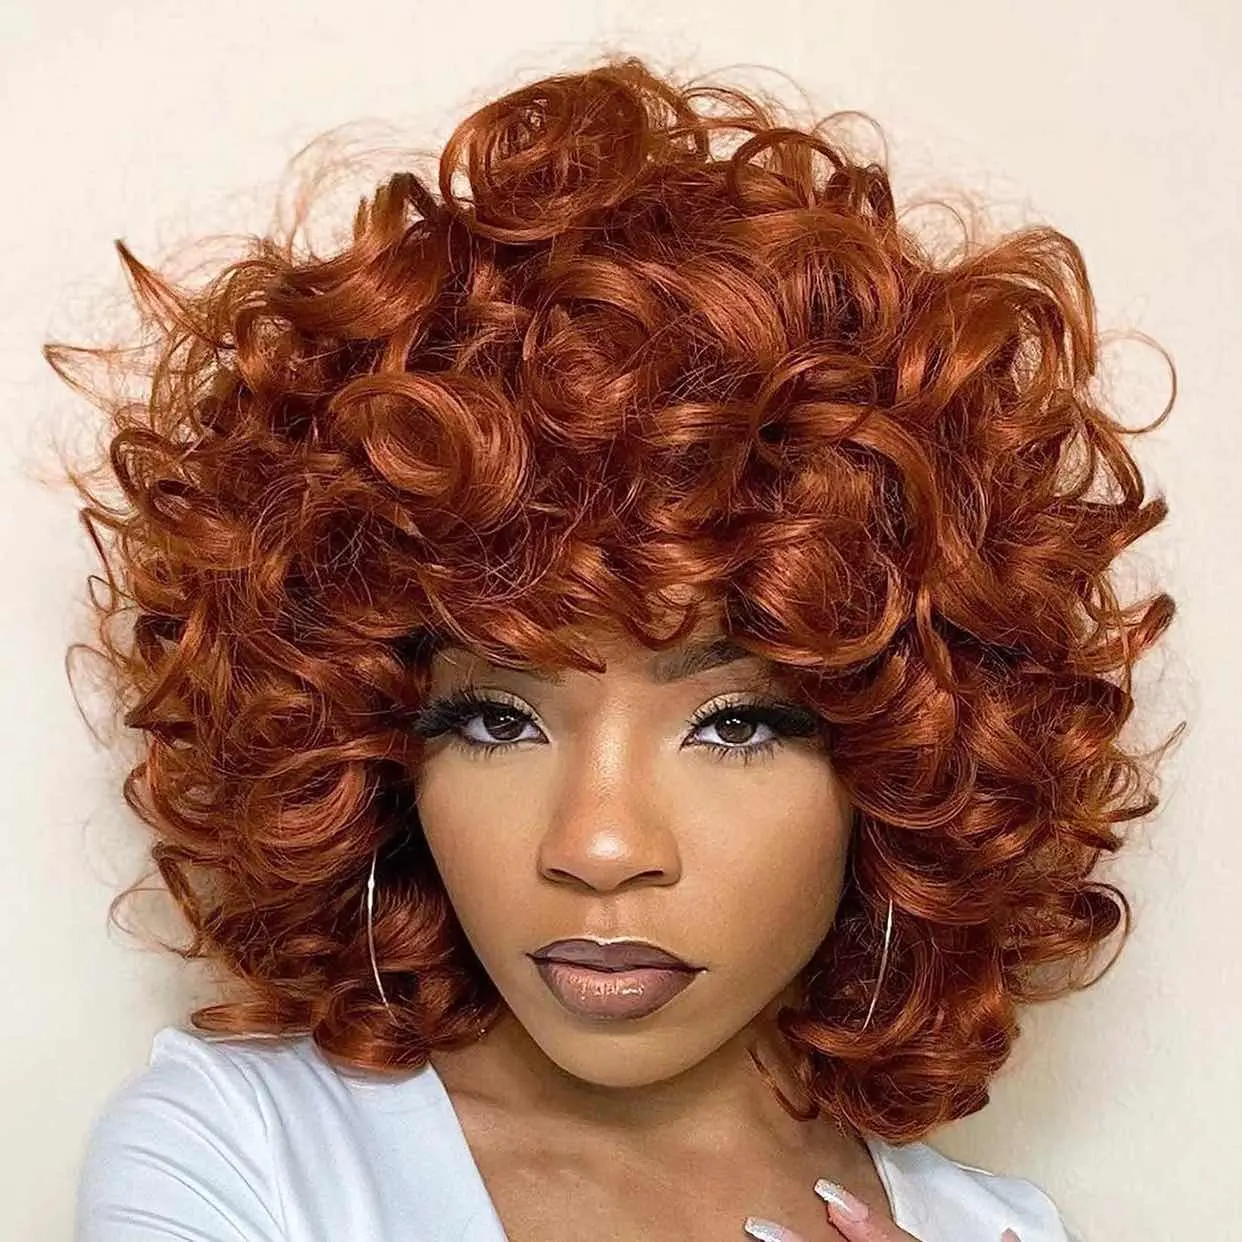 G&T Wig Afro Curly Wig with Bangs Glueless Wear and Go Copper Red Hair Big Bouncy Fluffy Short Kinky Curly Wig